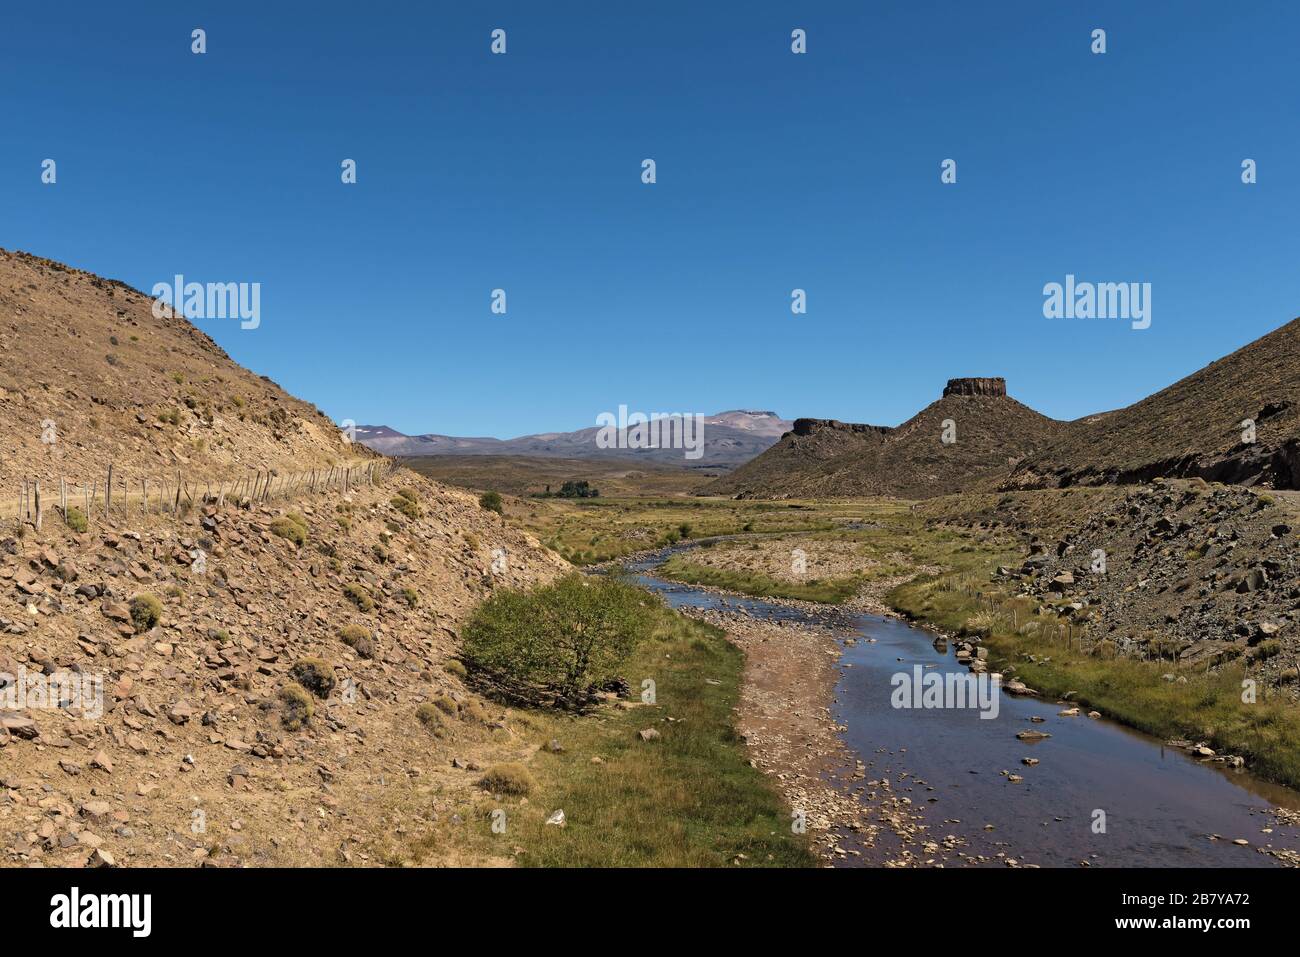 Deserted landscape in the province of Neuquen, Argentina Stock Photo